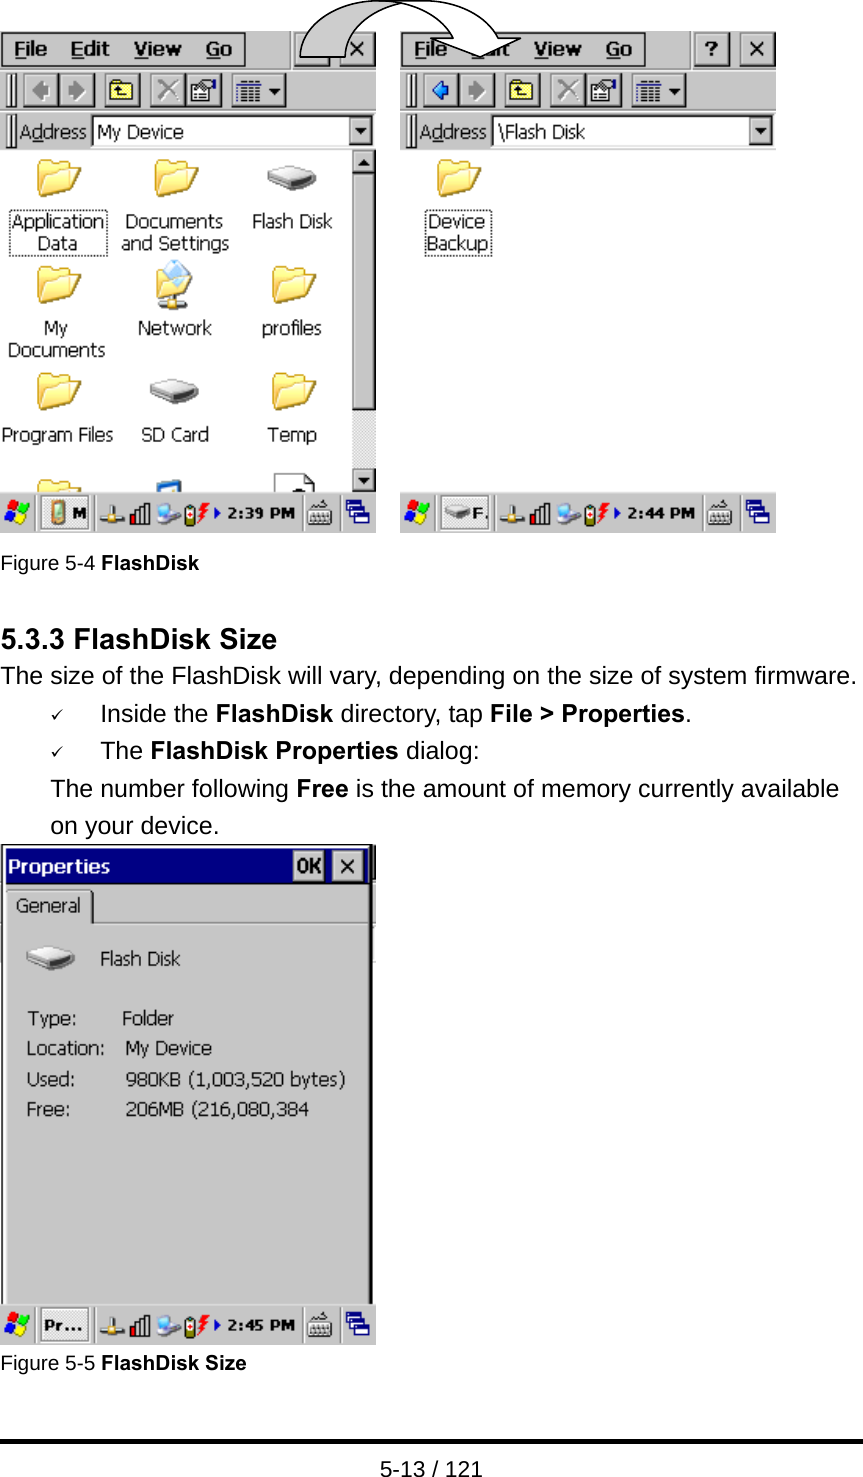  5-13 / 121      Figure 5-4 FlashDisk  5.3.3 FlashDisk Size The size of the FlashDisk will vary, depending on the size of system firmware. 9 Inside the FlashDisk directory, tap File &gt; Properties. 9 The FlashDisk Properties dialog: The number following Free is the amount of memory currently available on your device.  Figure 5-5 FlashDisk Size  